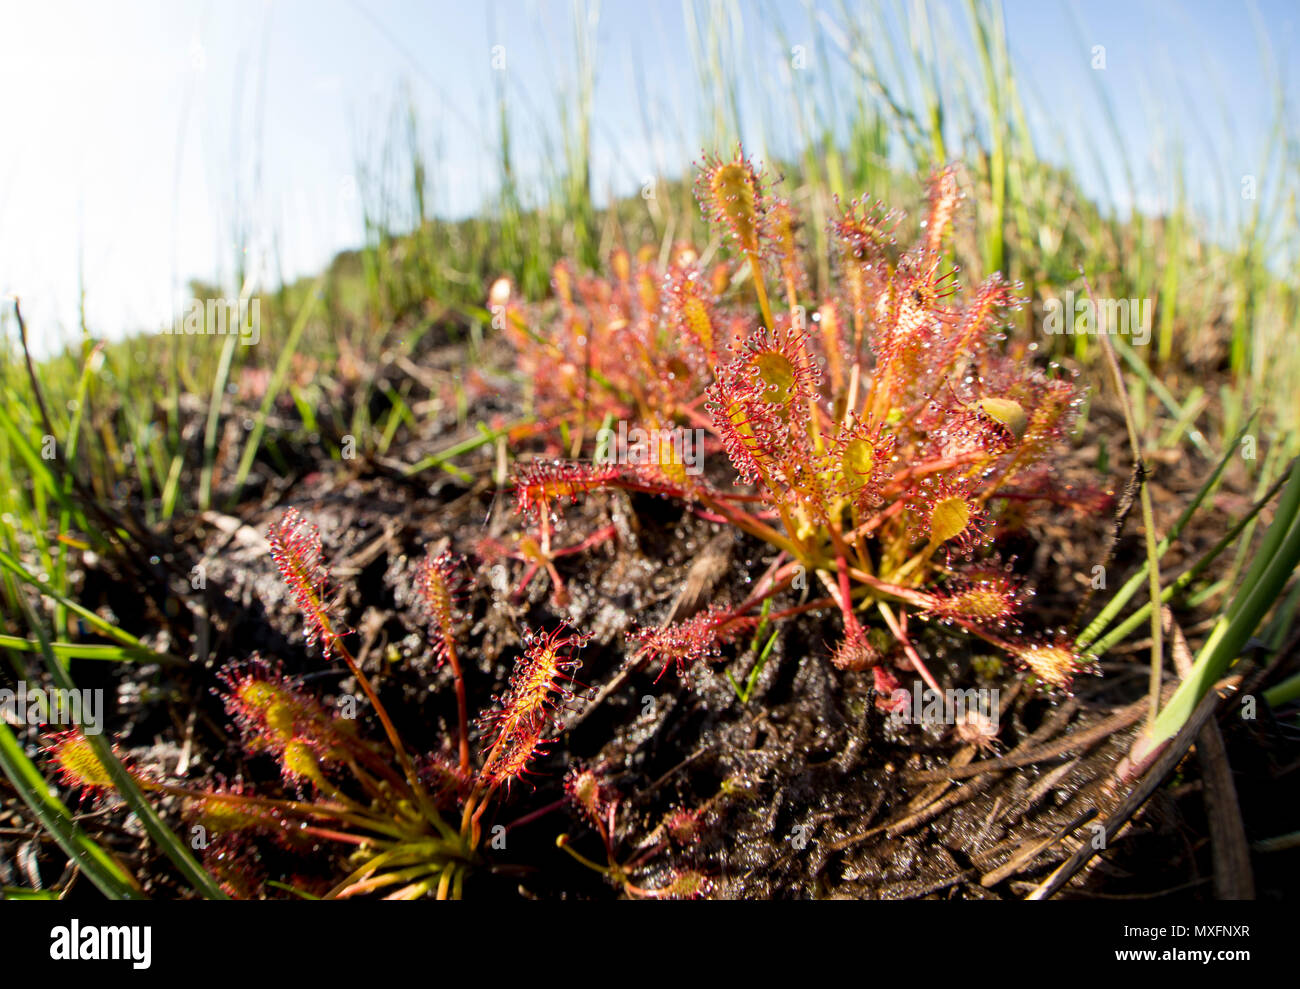 Oblong-leaved sundews, Drosera intermedia, growing on wet, peaty ground near heather and coniferous forestry. The plant secretes sticky mucilage from  Stock Photo